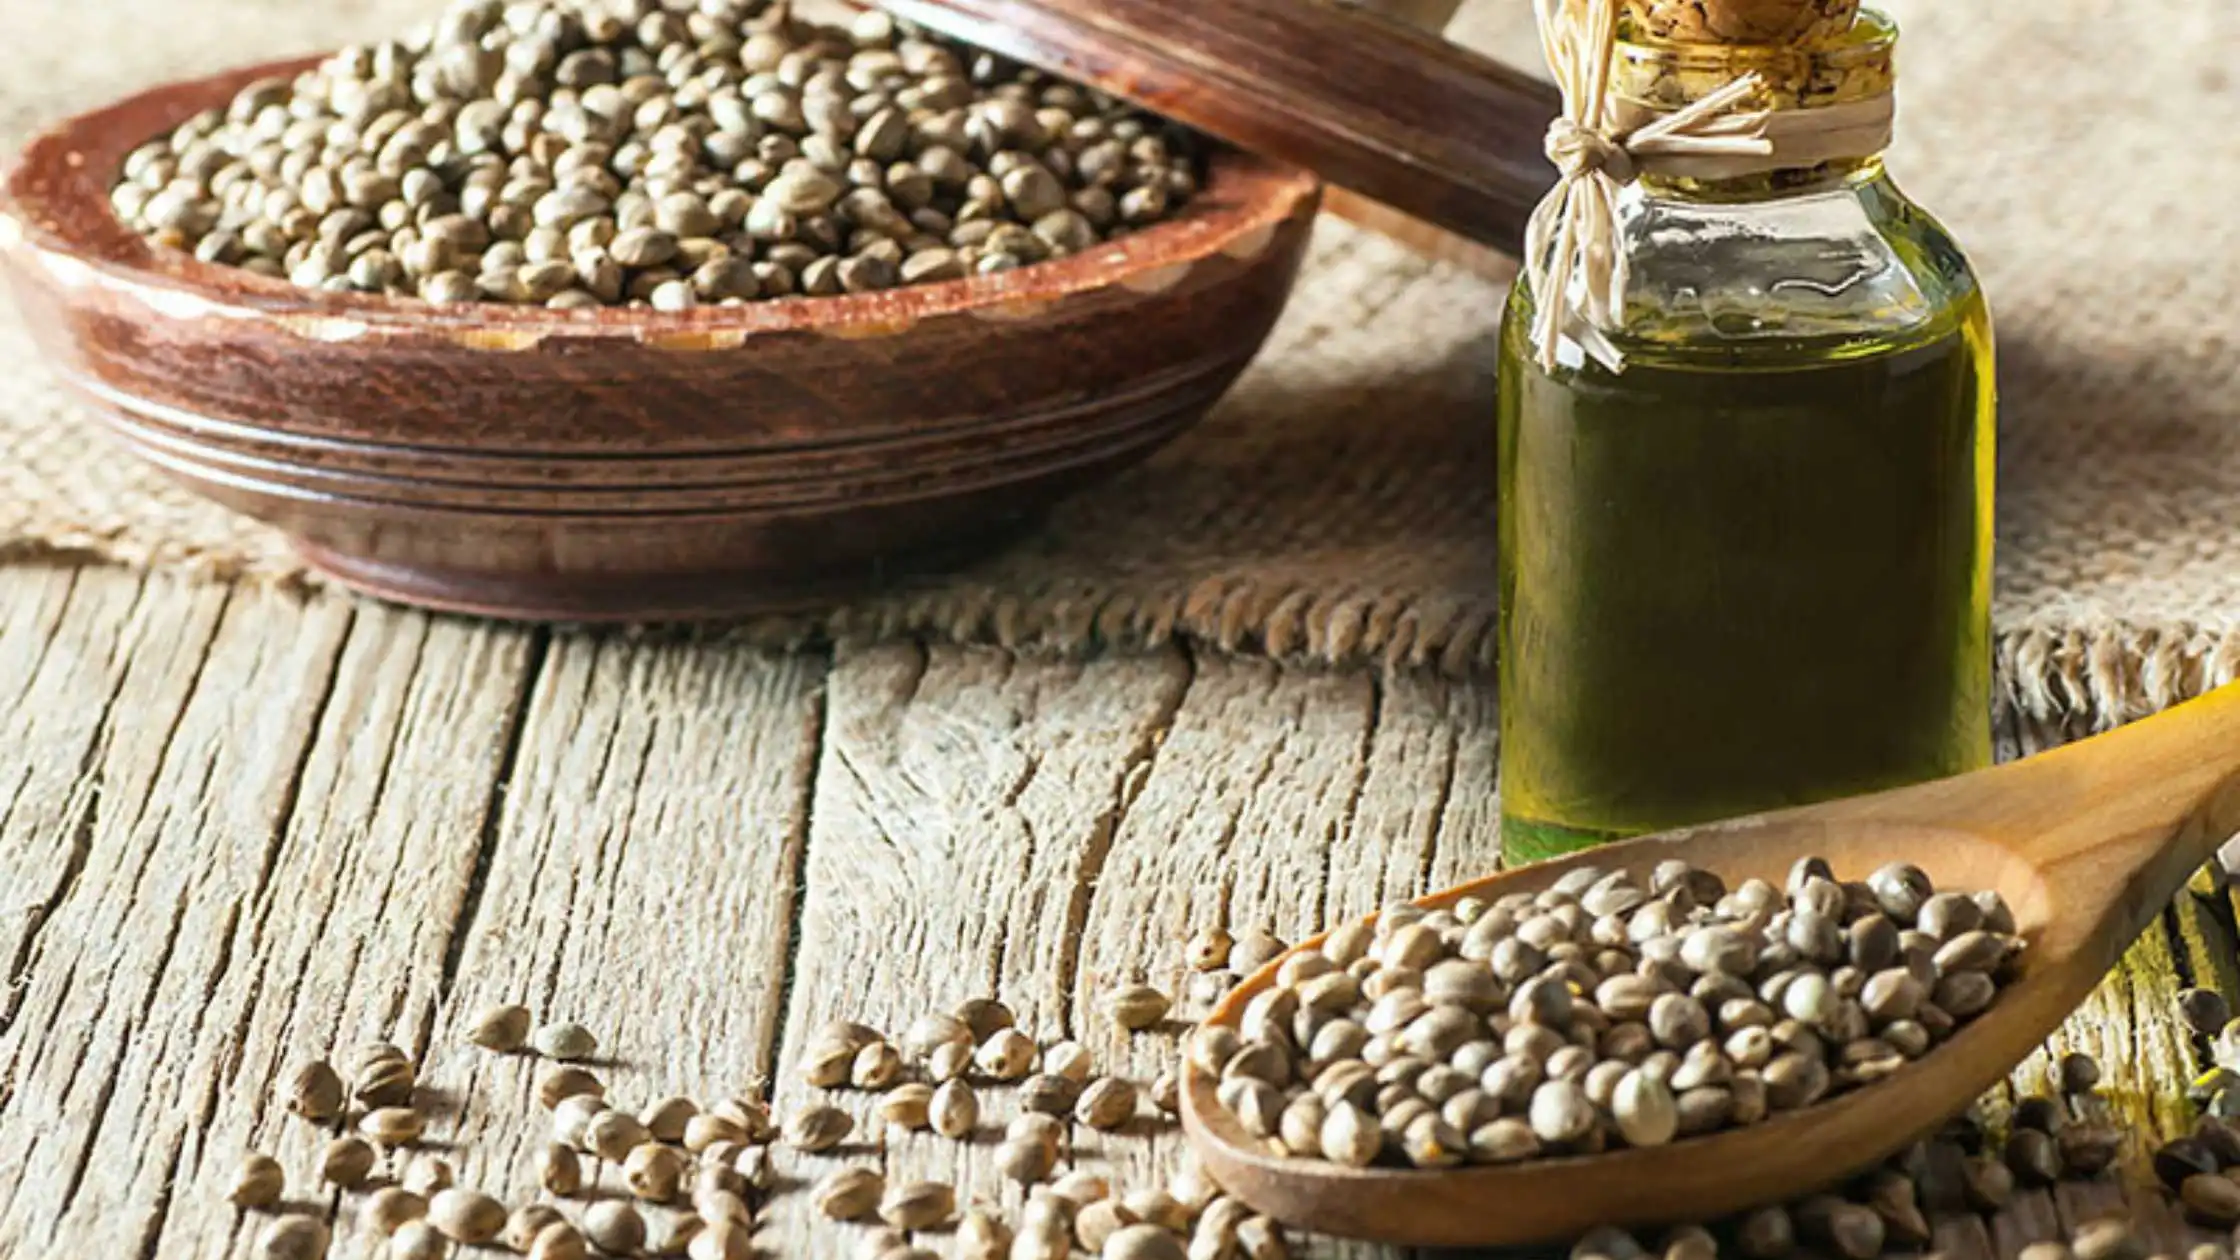 5 Easy Ways to Add More Hemp to your Diet